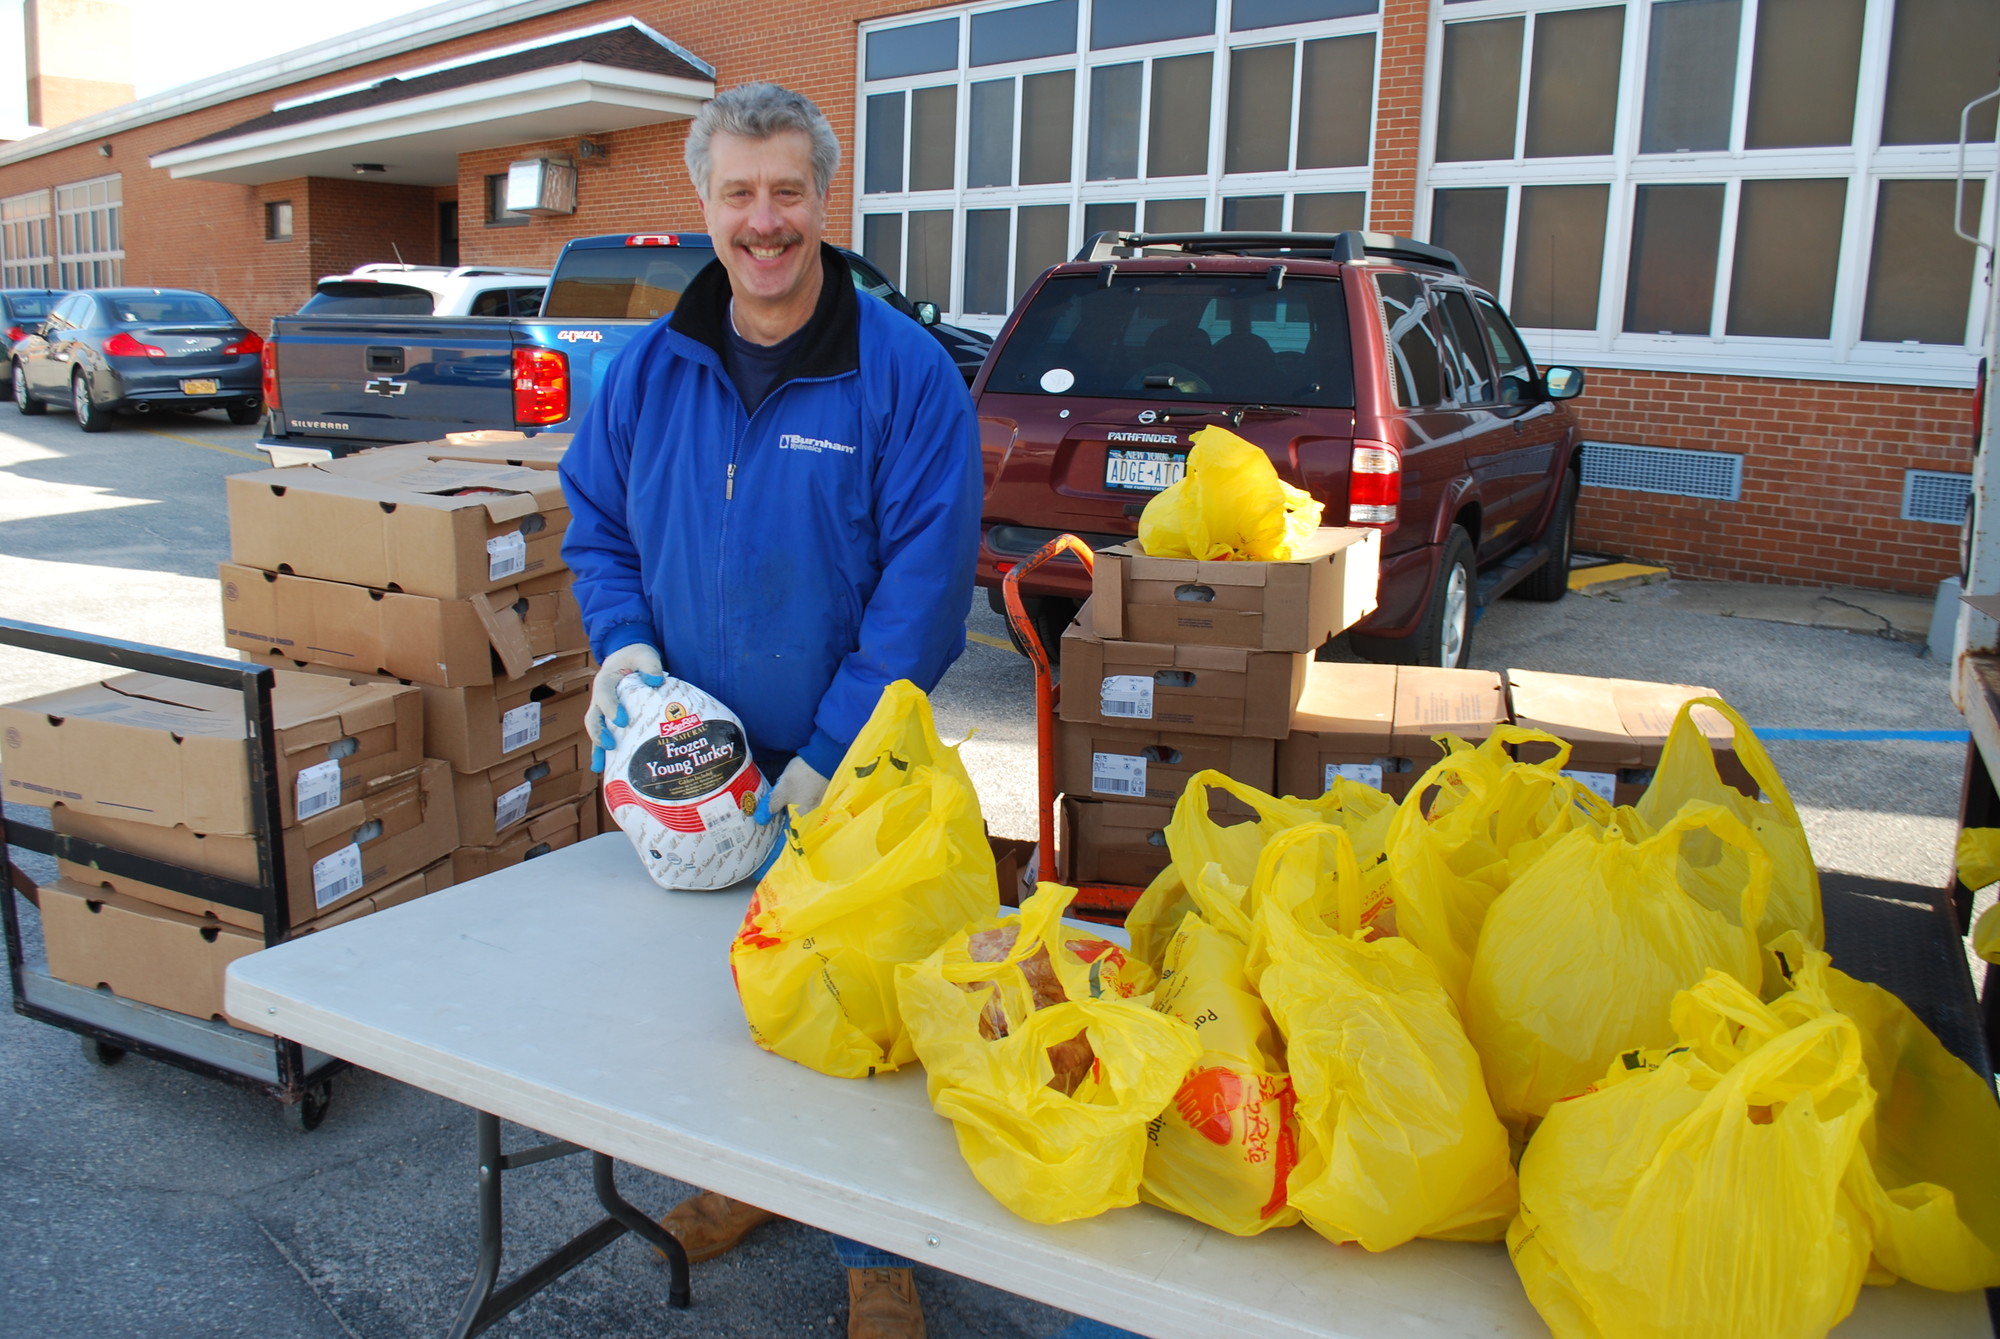 Holiday Food Drive Chairperson Jay Steinmetz packed up turkeys for local, needy families to enjoy on Easter Sunday.